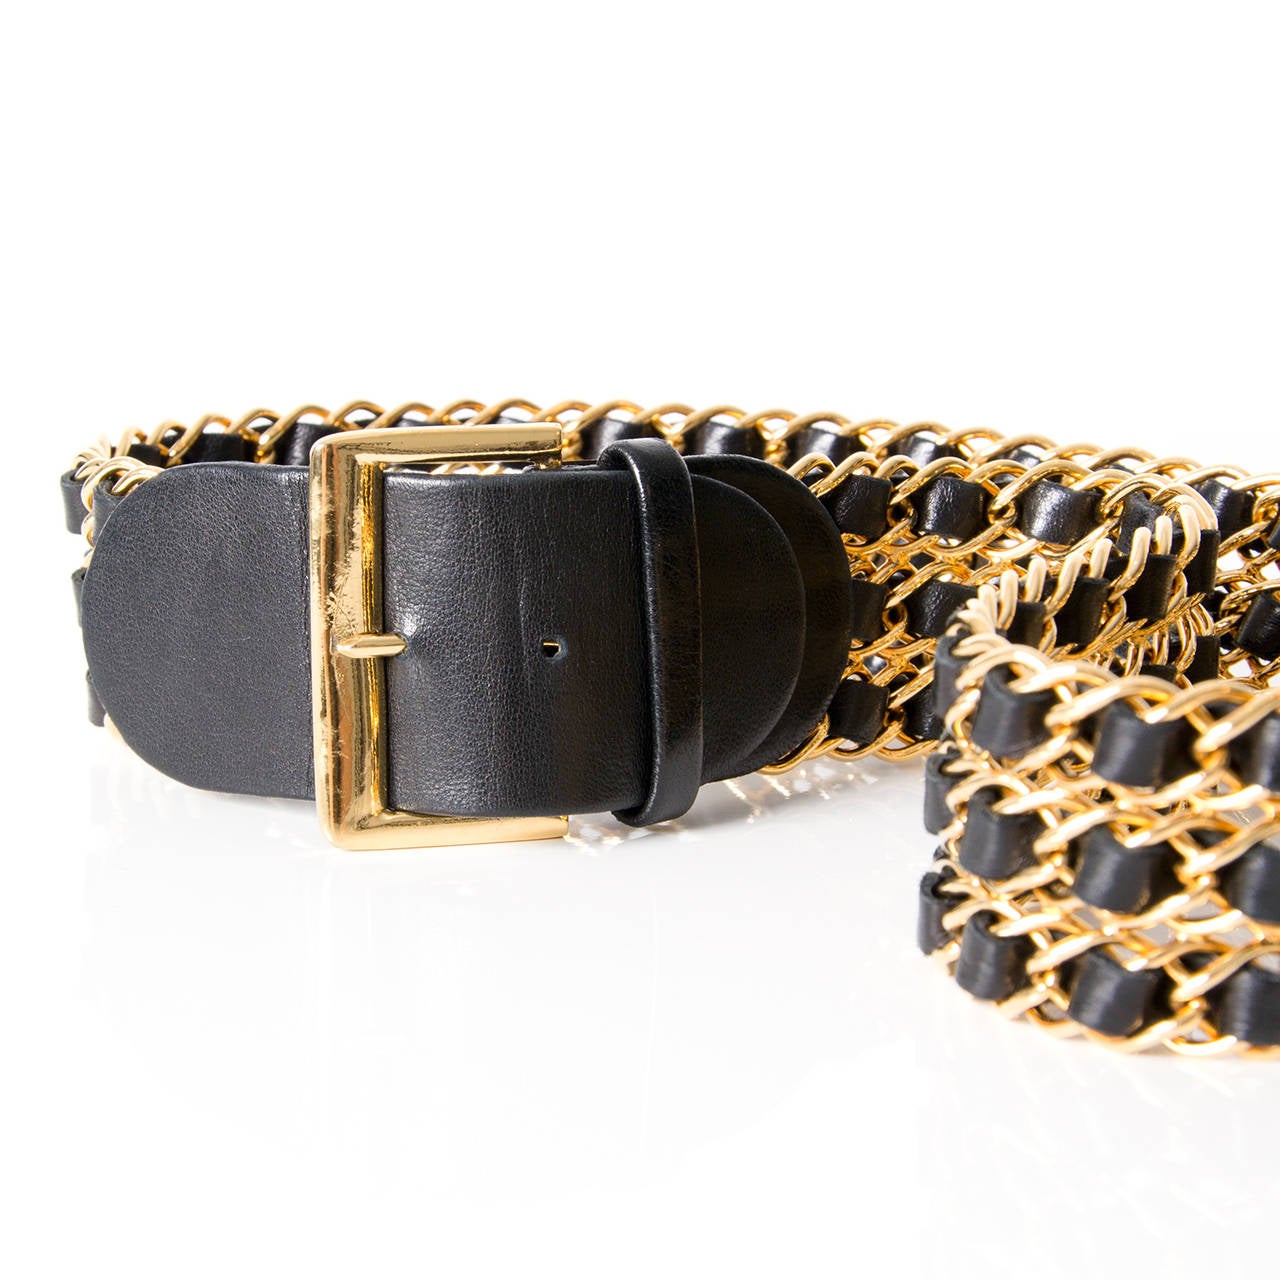 Chained belts have always been key accessories from the house of Chanel. This black and gold triple chain belt is designed to be a real head-turner and is highly collectible.